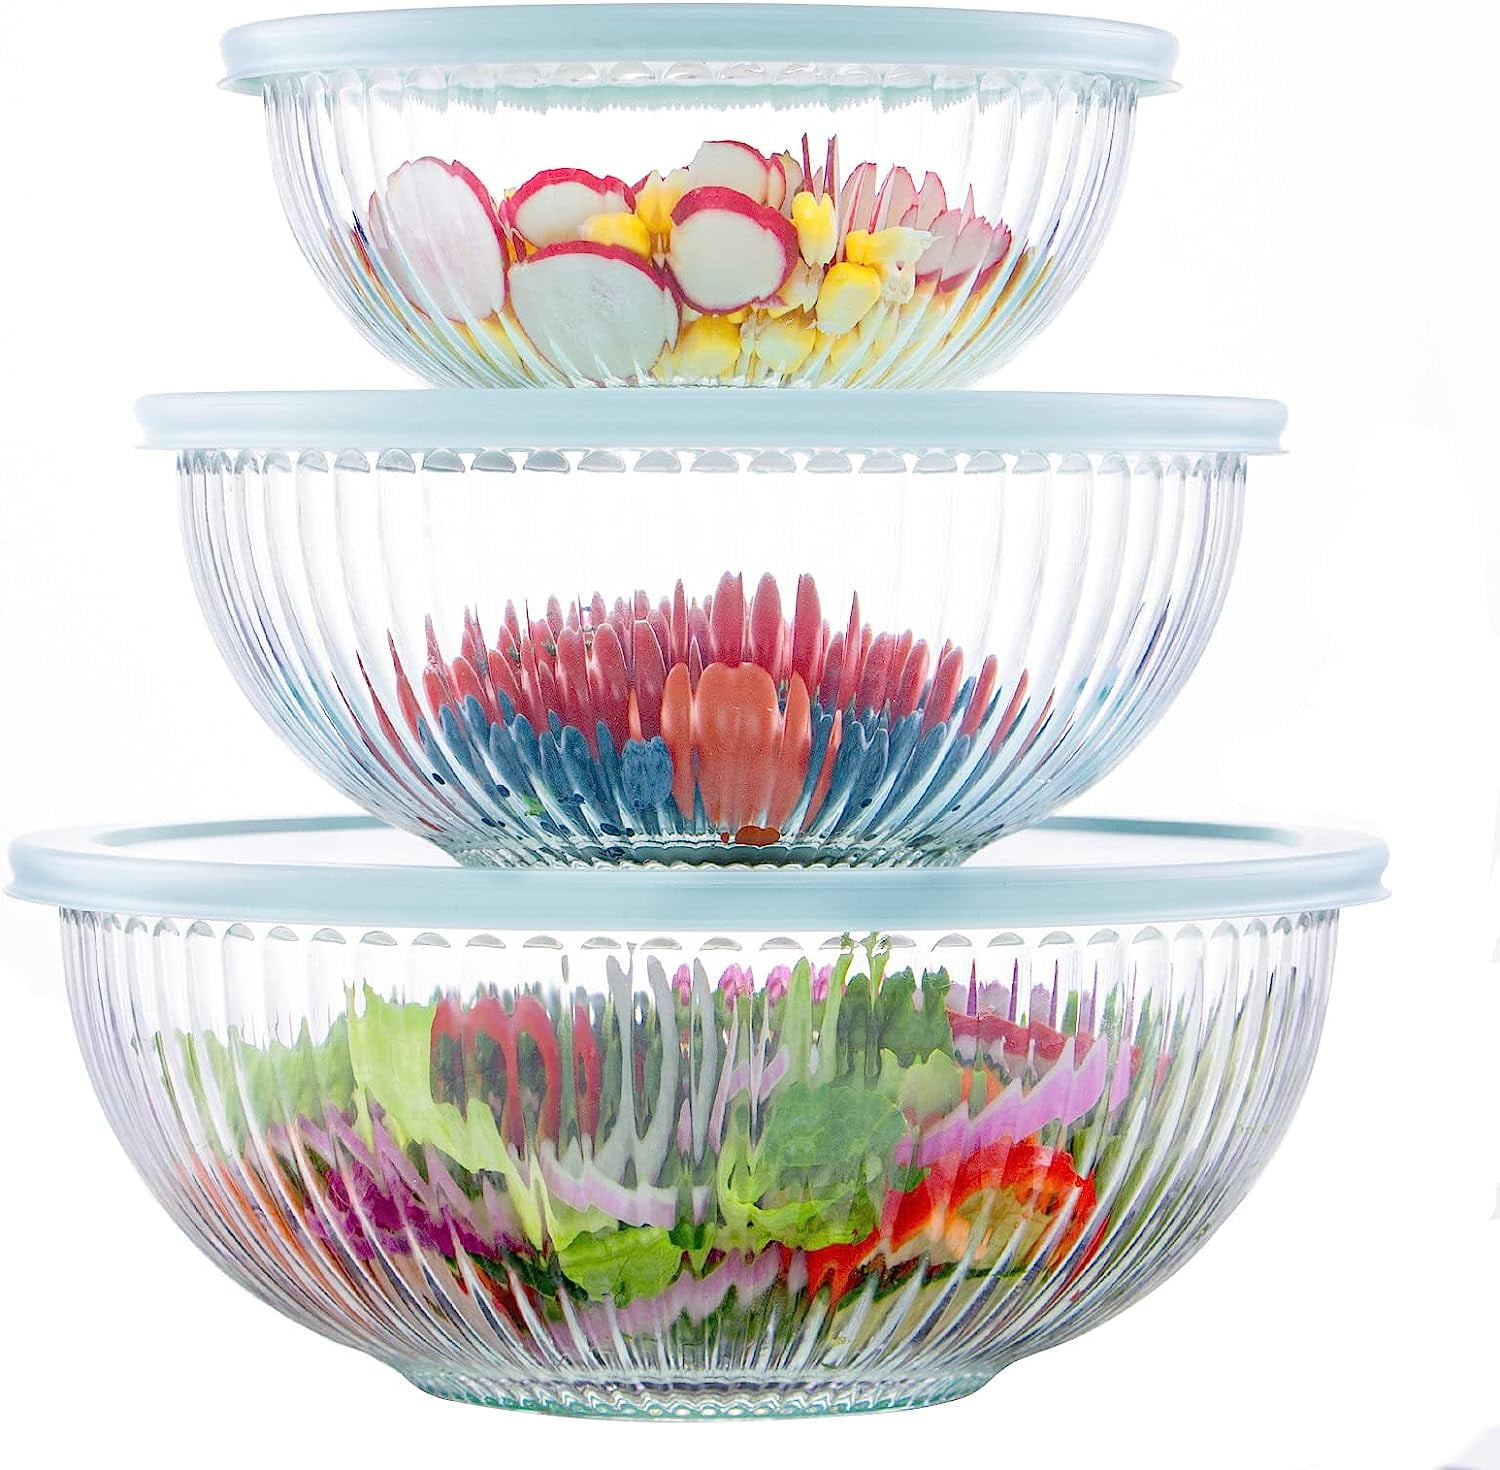 Mixing Bowls With Lids 5 Pcs Nesting Stainless Steel Mixing Bowls  Microwavable Kitchen Food Containers With Airtight Lids - AliExpress